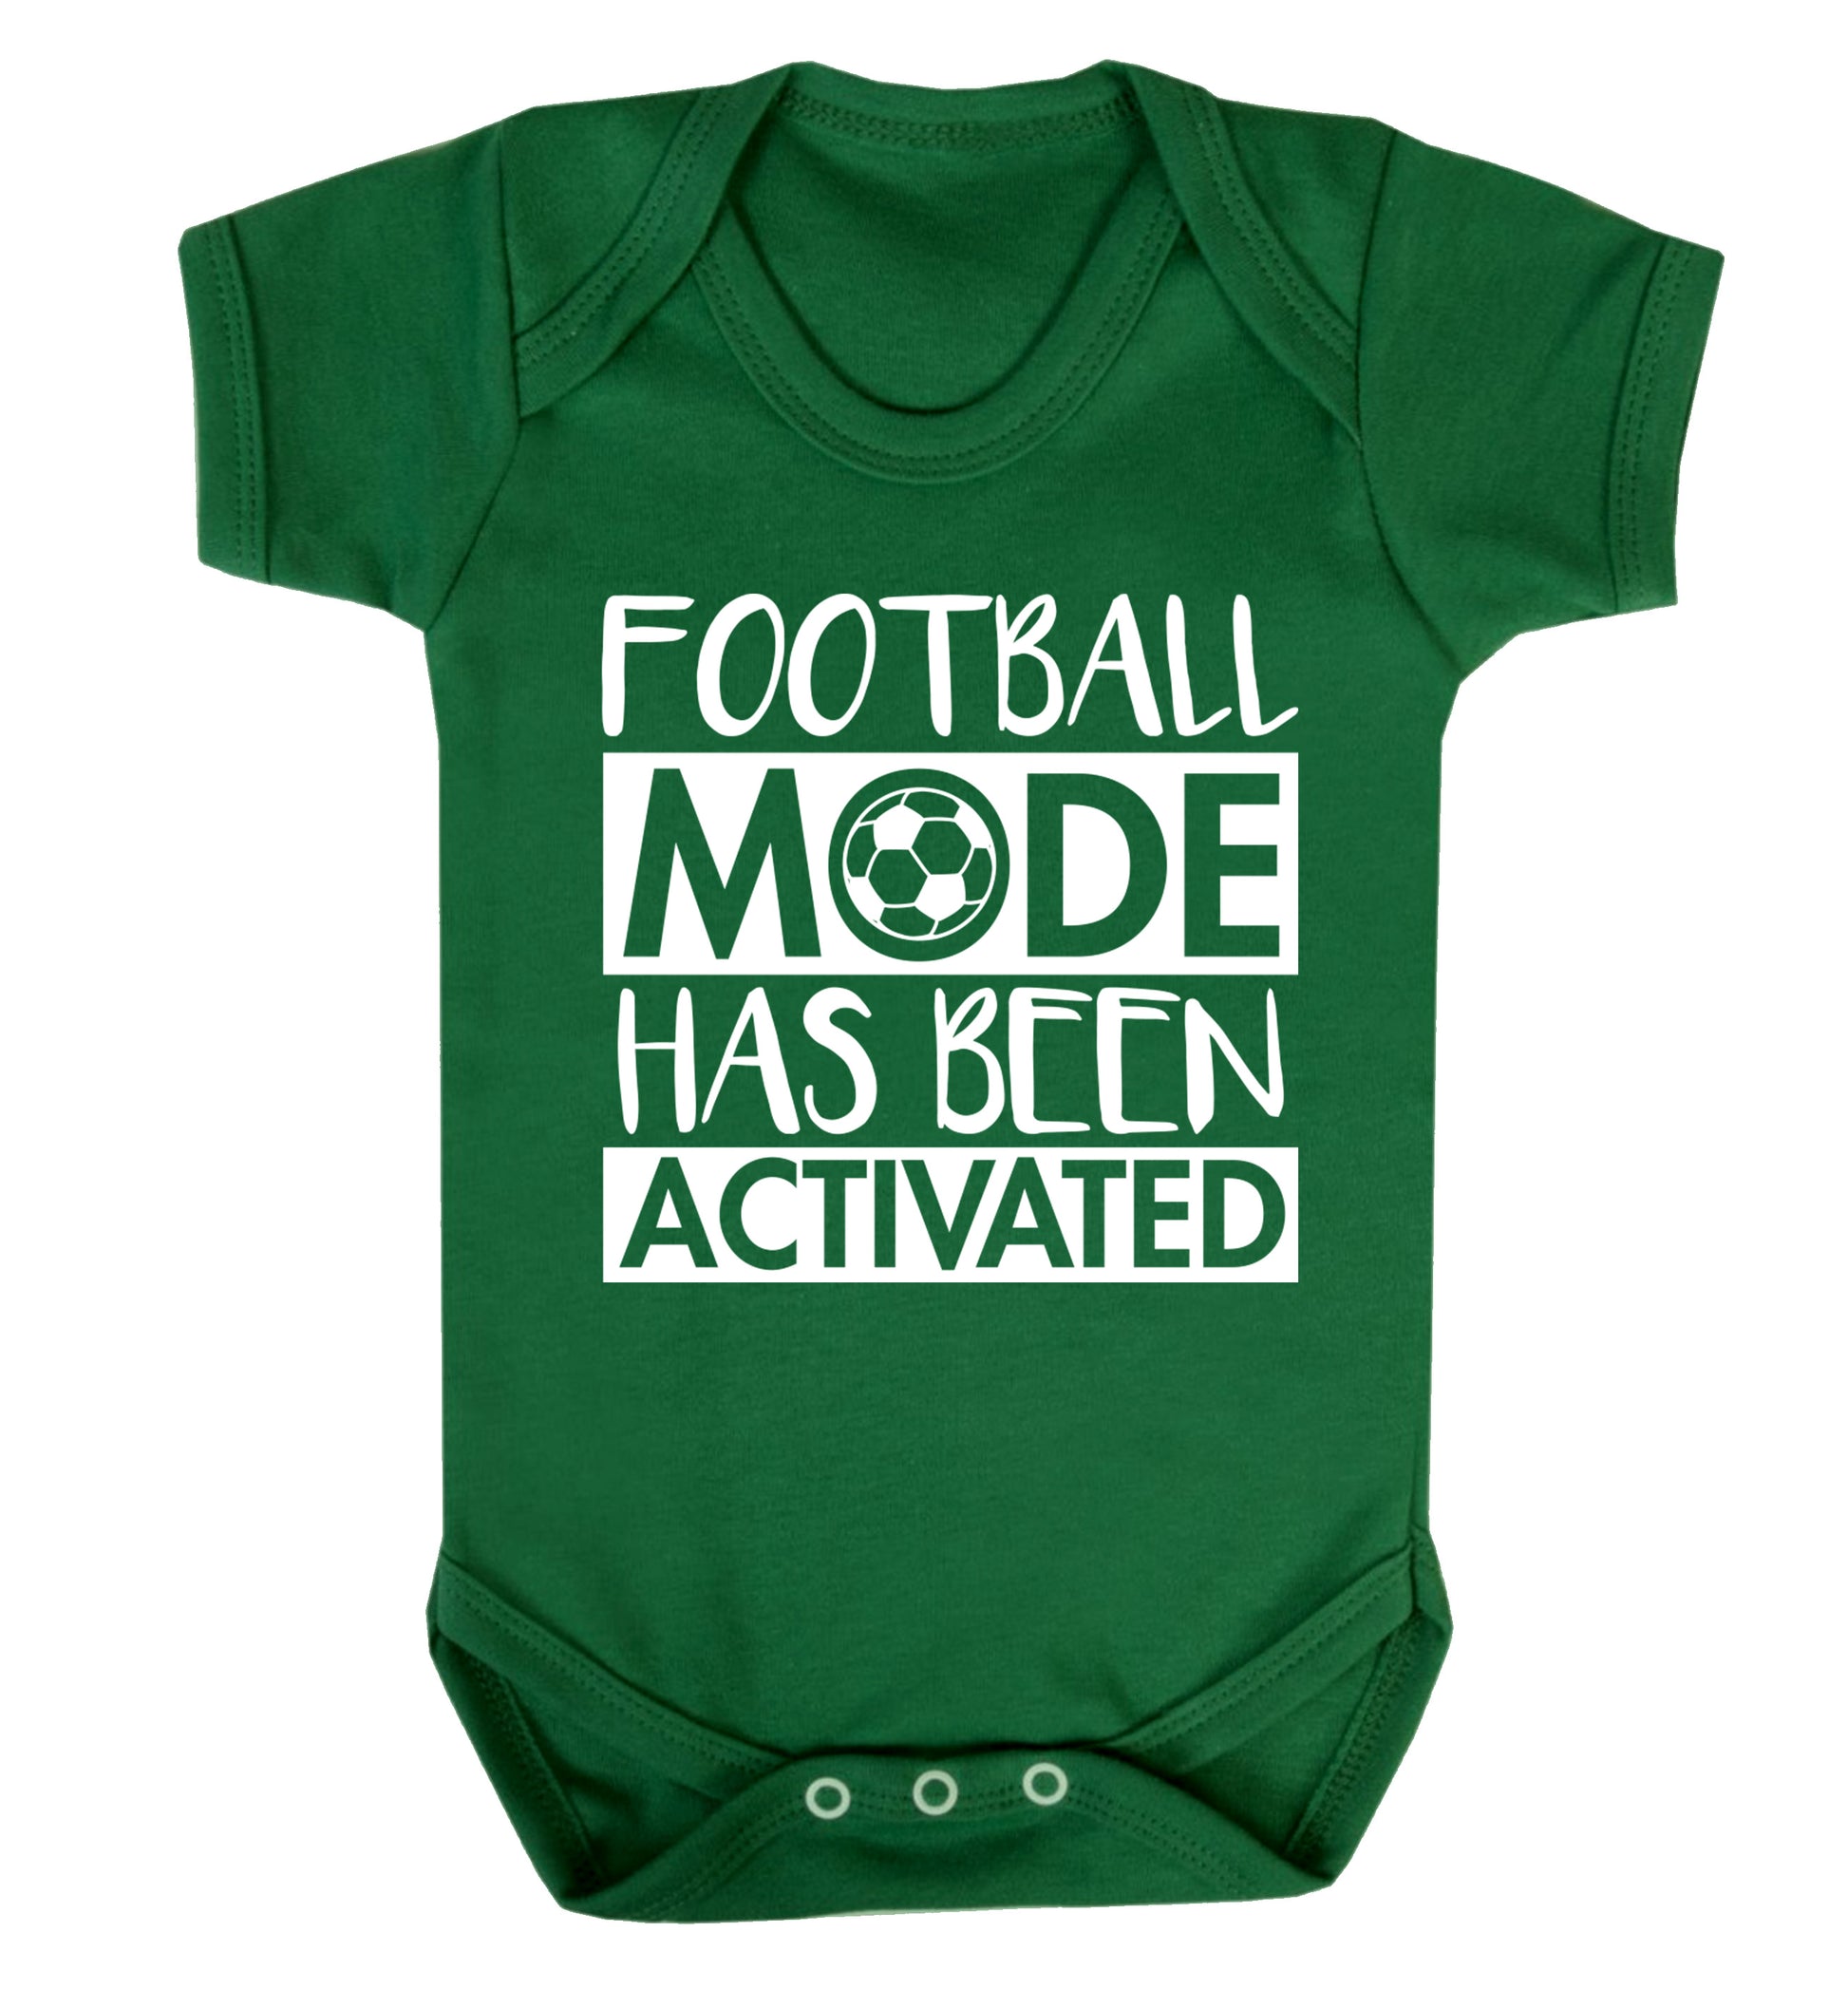 Football mode has been activated Baby Vest green 18-24 months